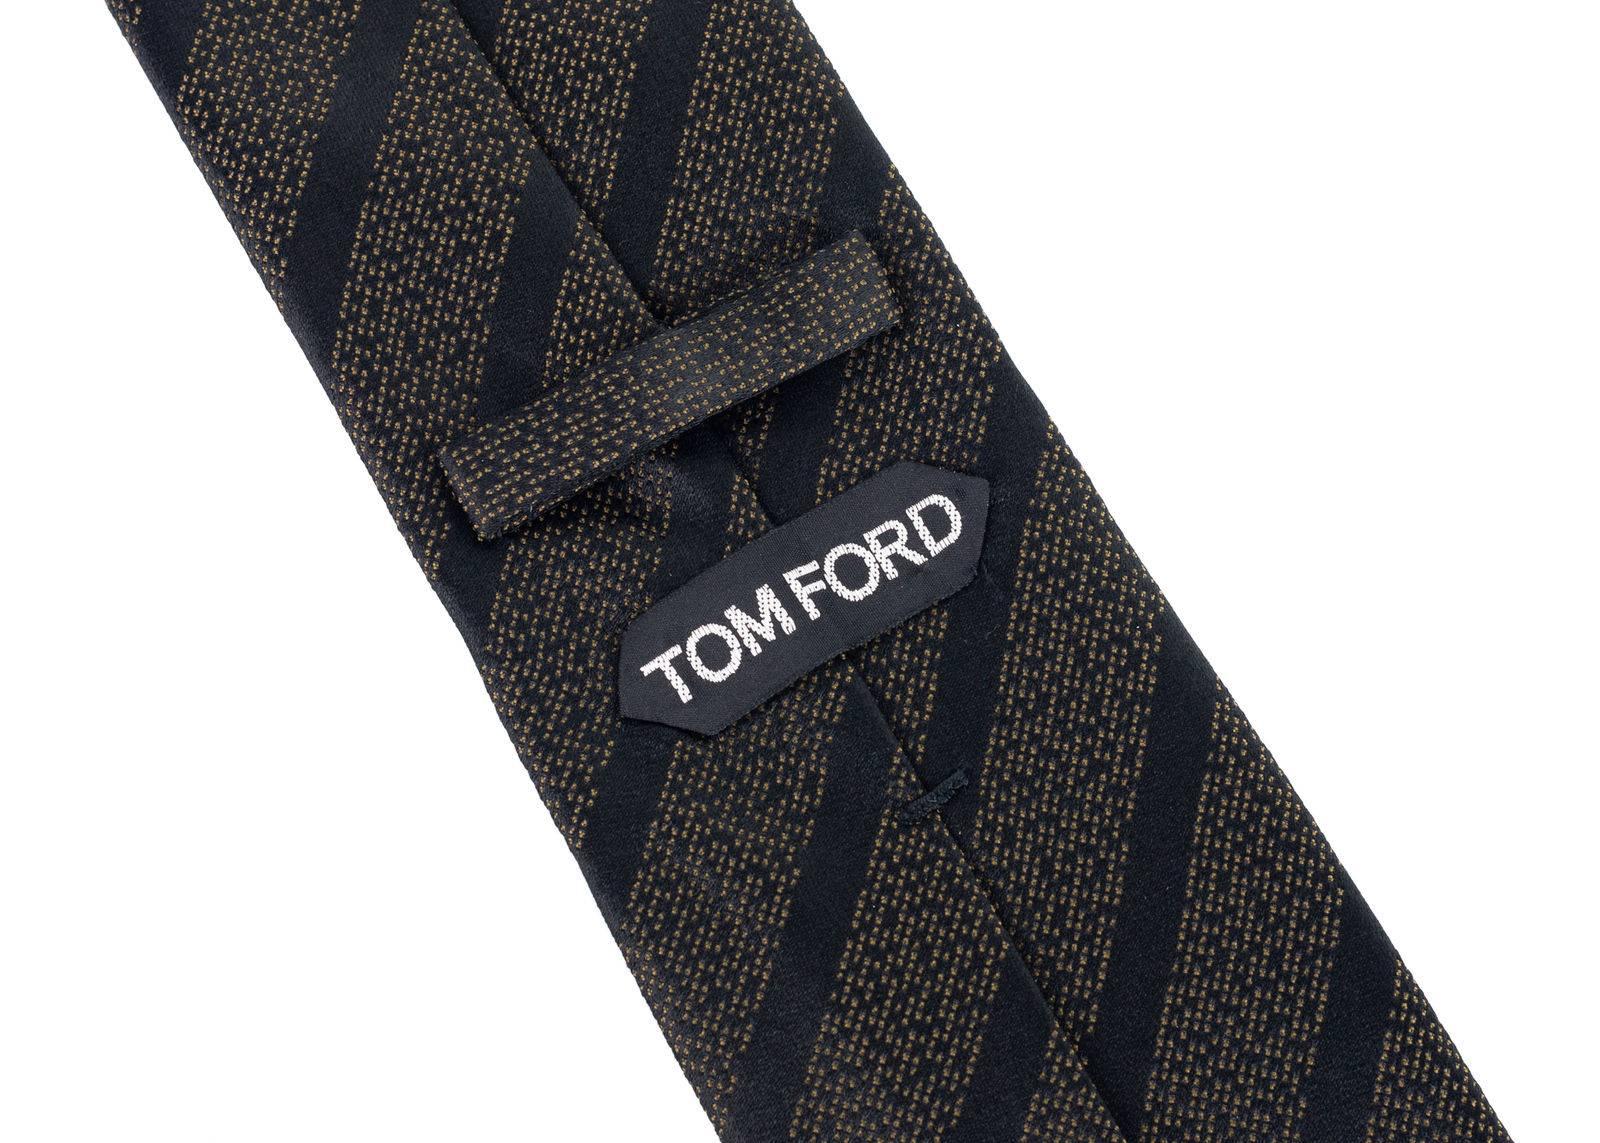 Italian luxury brand, Tom Ford, has crafted these gorgeous Woven and Silk Blend Tie for important special occasions and professional events. The tie is great to pair with your favorite solid color button down and blazers with your chosen pair or